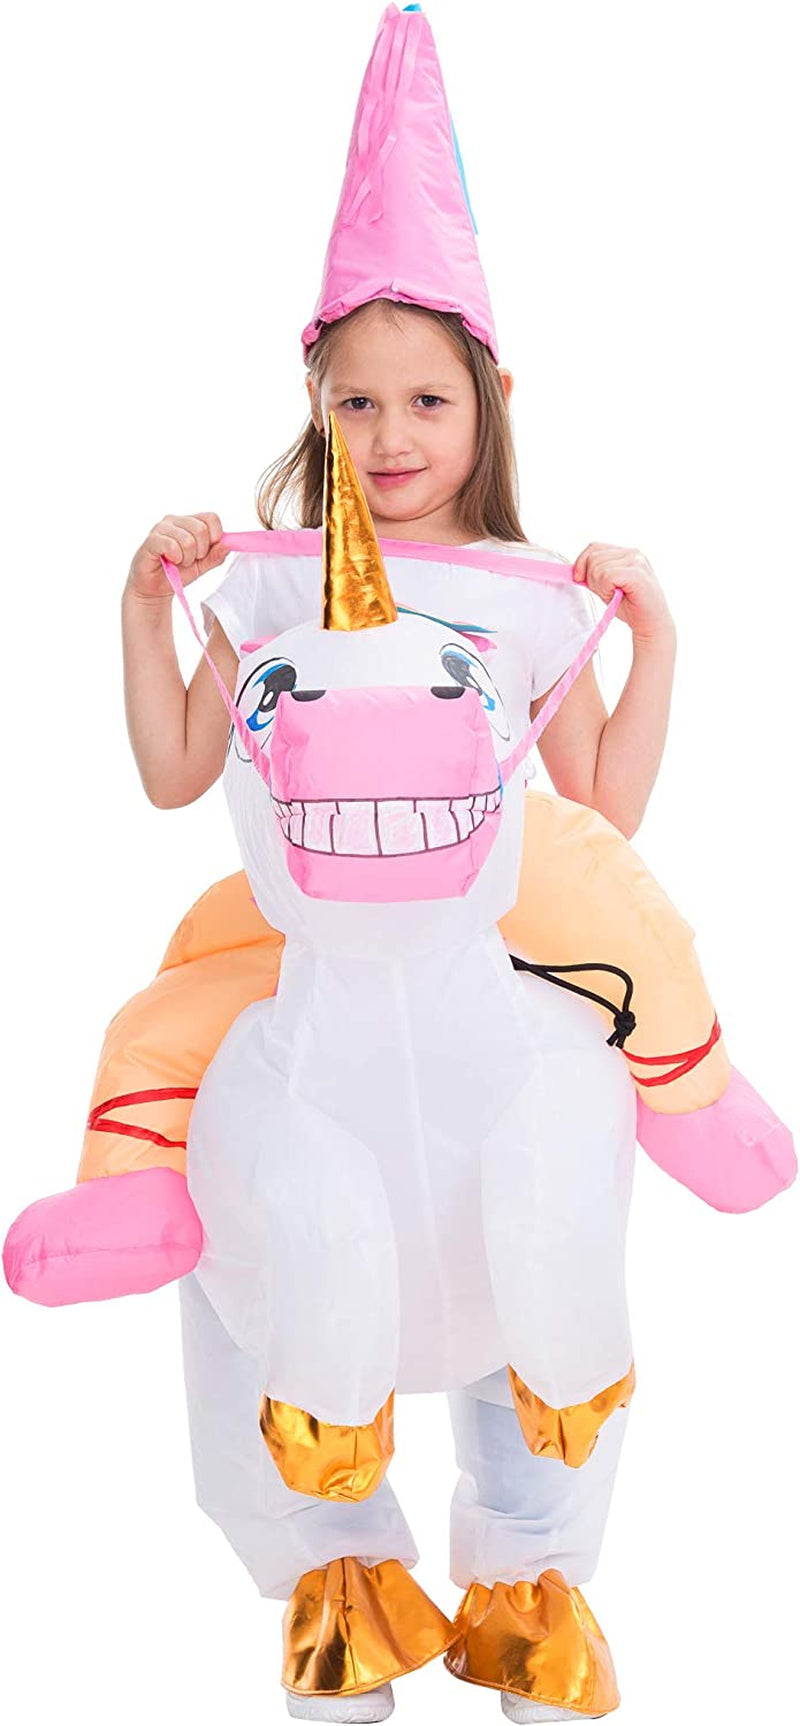 Spooktacular Creations Inflatable Costume Riding a Unicorn Air Blow-Up Deluxe Halloween Costume  Joyin Inc   